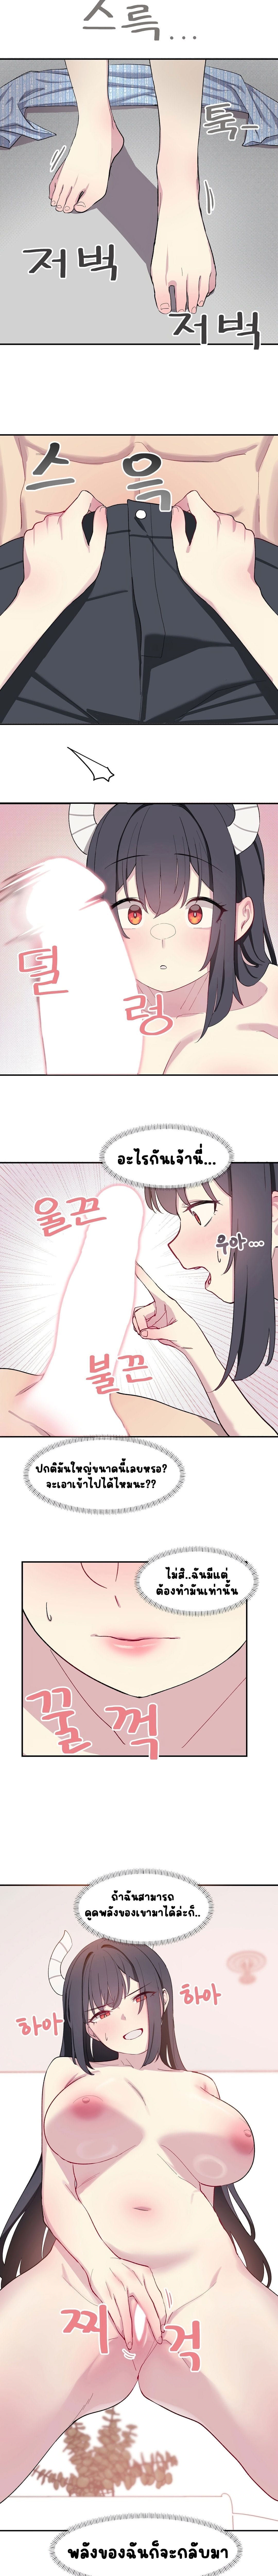 Hospitalized Life in Another World ตอนที่ 2 ภาพ 12